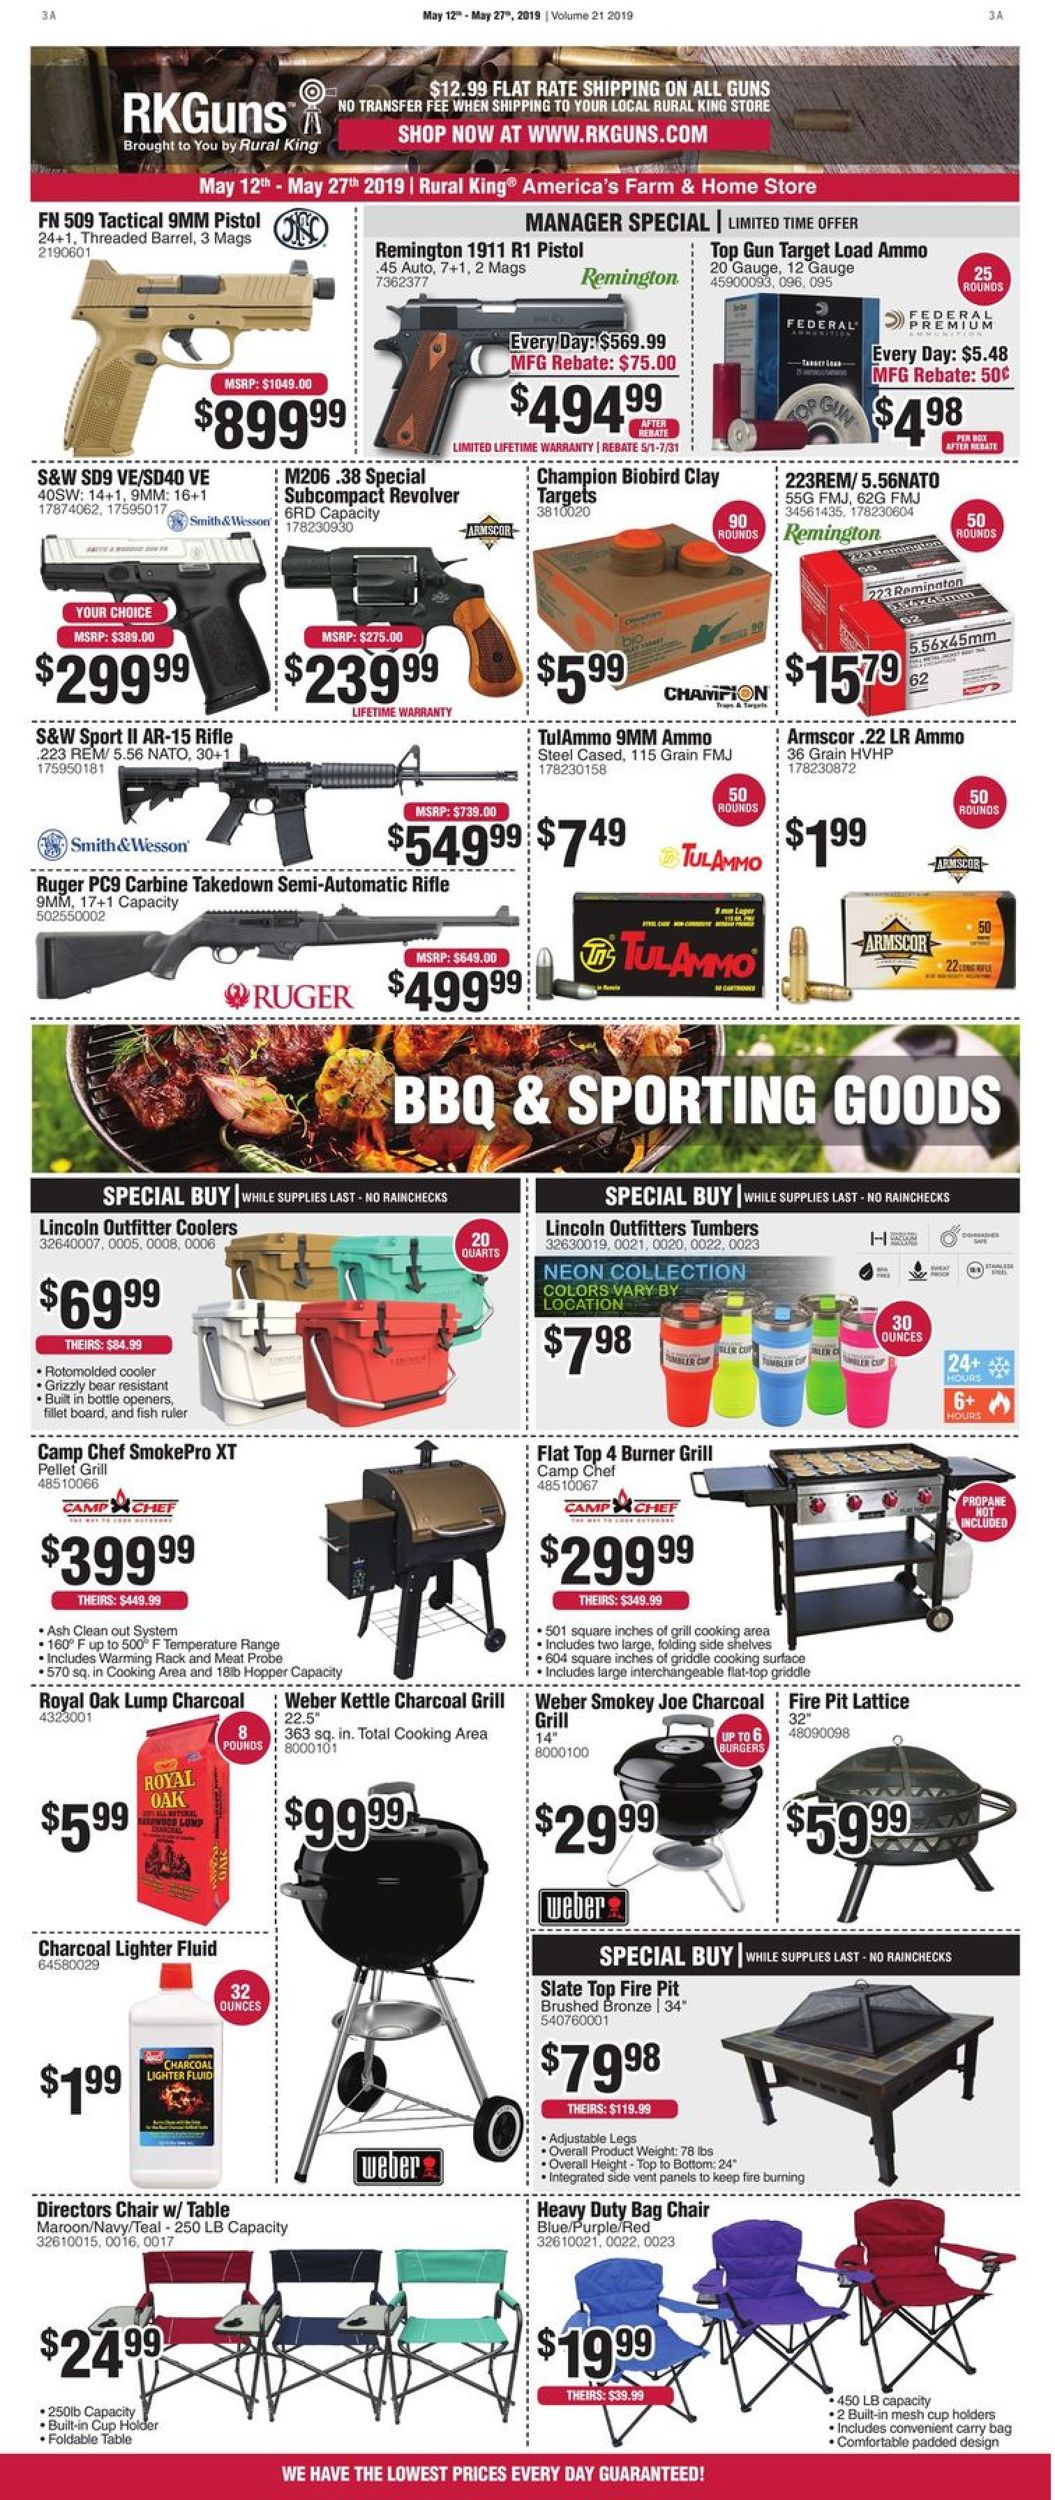 Rural King Cur Weekly Ad 05 12, Rural King Fire Pit